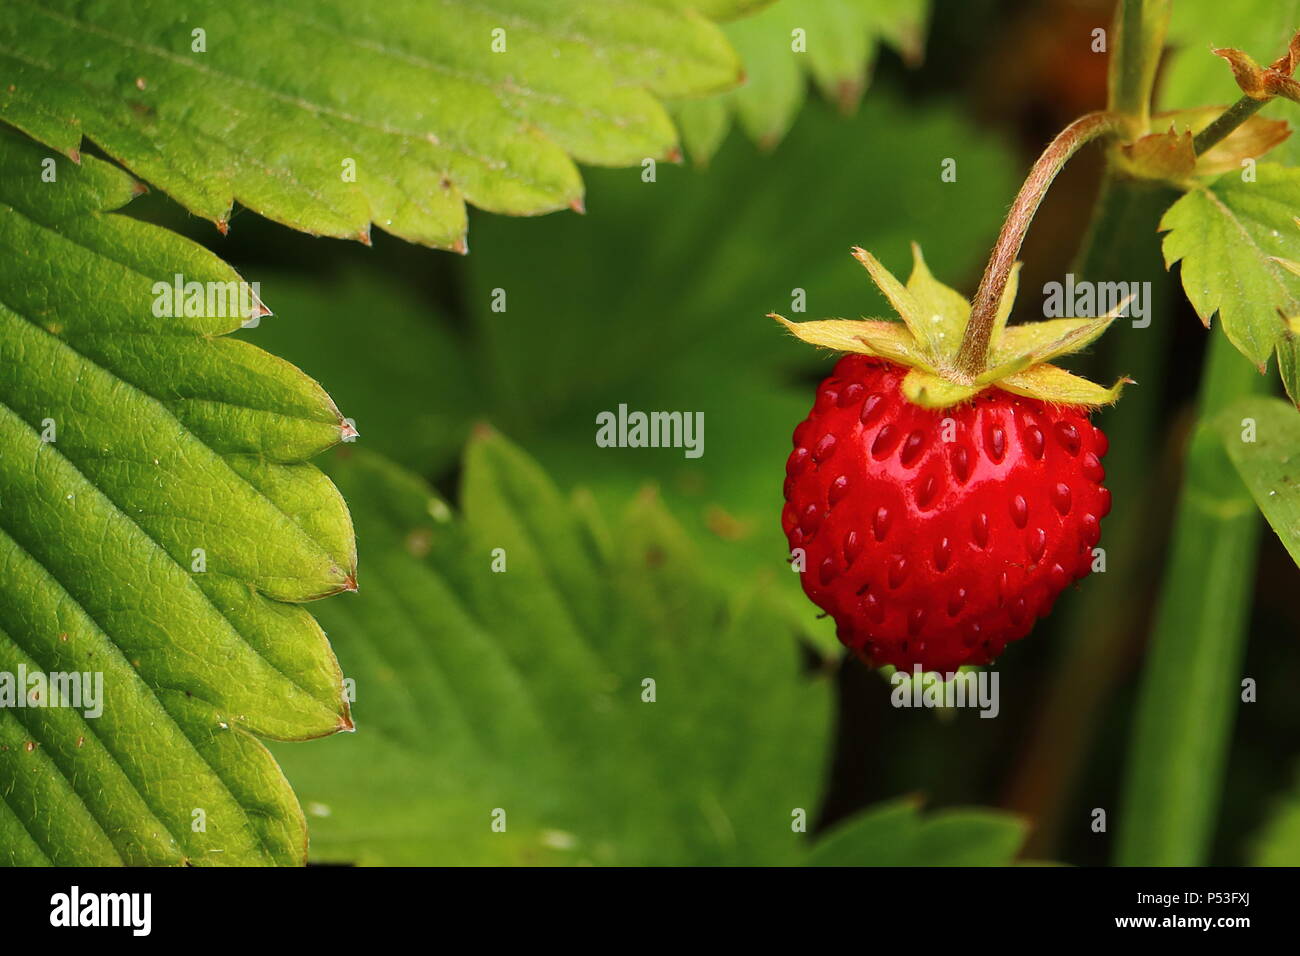 Wild strawberry, wild berry, fruiting plant in close-up Stock Photo